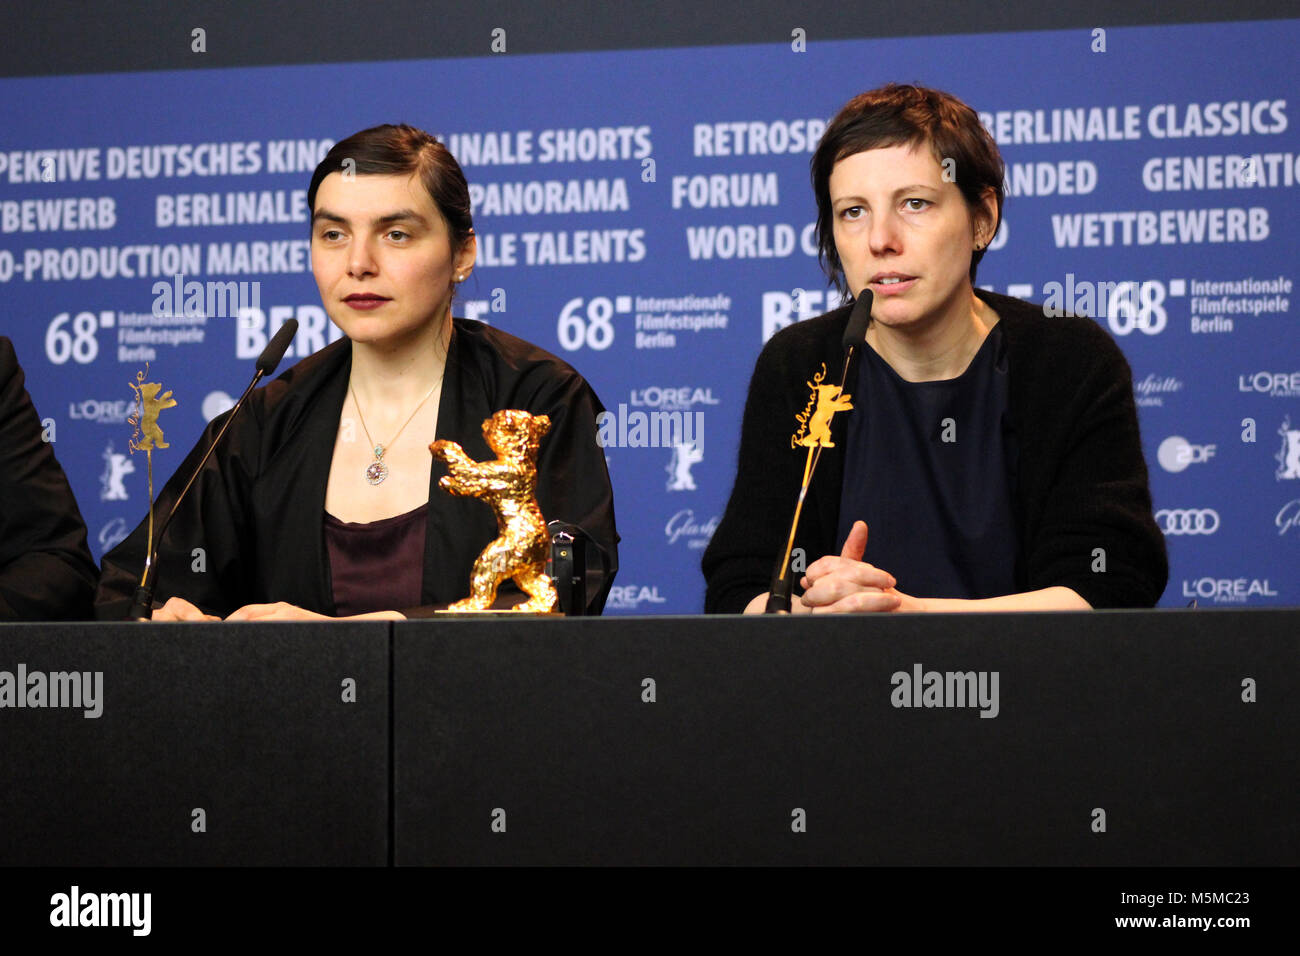 Berlin, Germany. 24th February, 2018. Winner 68th Berlinale,  golden bear, Goldener Bär Best Film: 'Touch Me Not' by Adina Pintilie , Berlin, Germany. 24th February, 2018. Press conference at the Grand Hyatt Hotel in Berlin/Germany for 68th Berlinale, Featuring:  Adina Pintilie, “Credits: T.O.Pictures / Alamy Live News“ Stock Photo